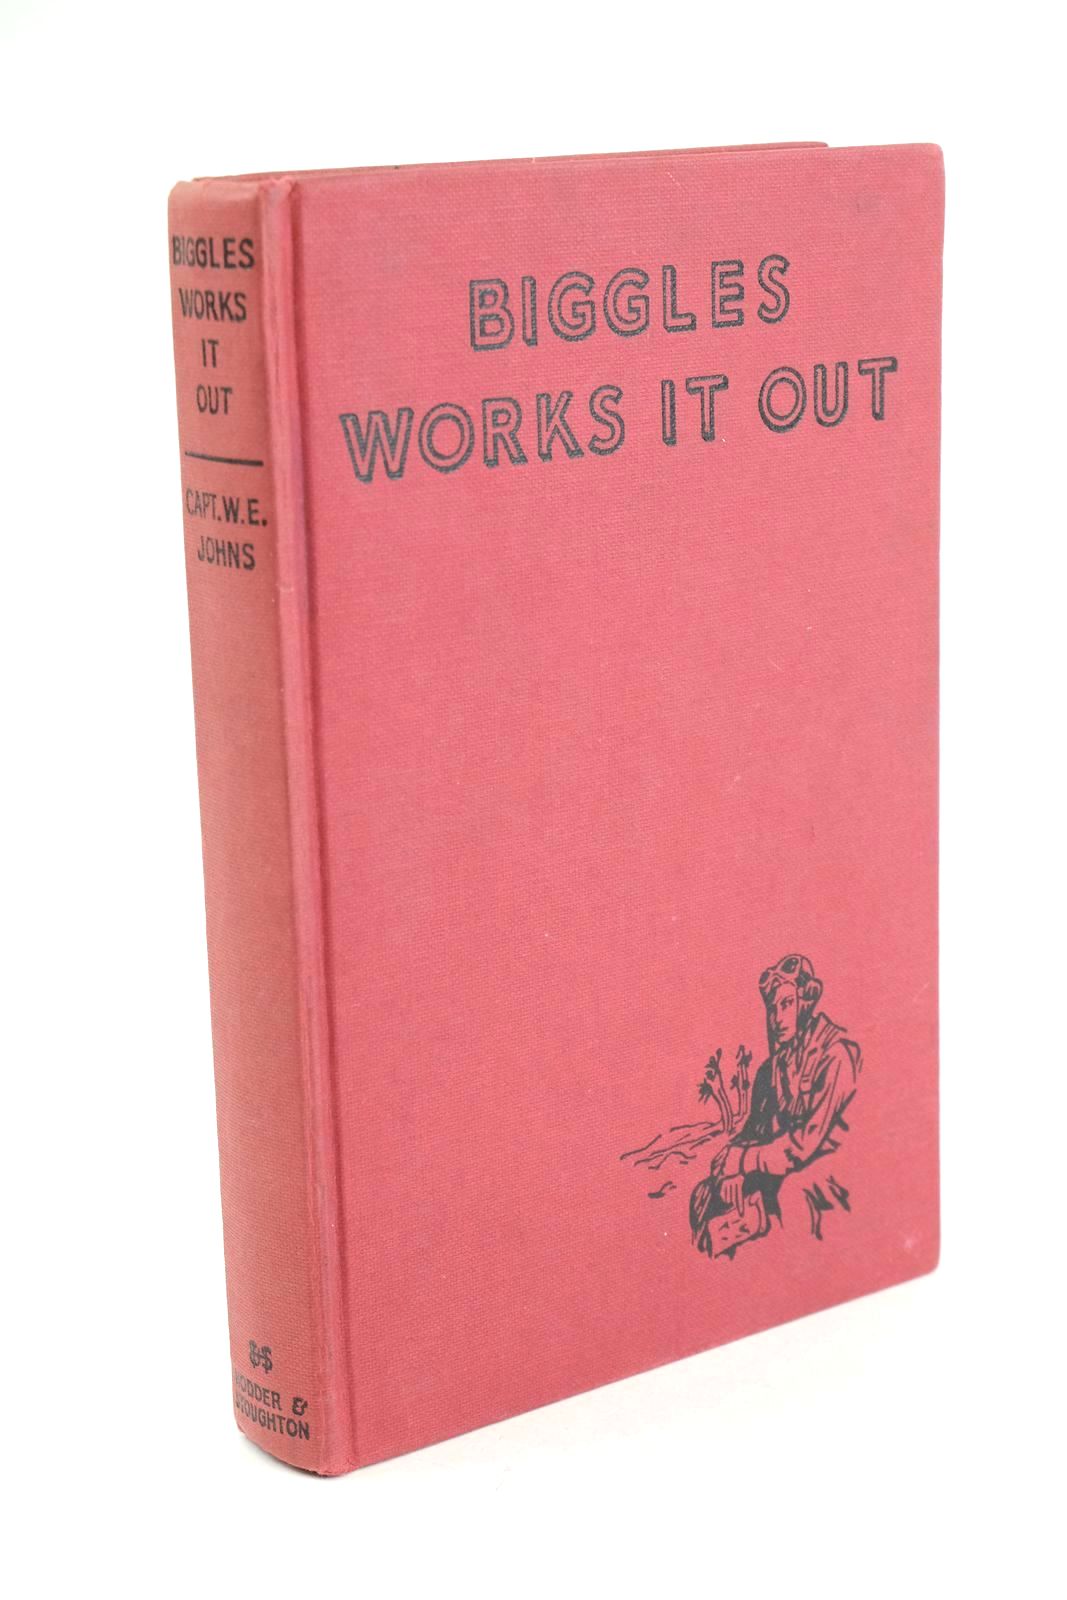 Photo of BIGGLES WORKS IT OUT written by Johns, W.E. illustrated by Stead,  published by Hodder &amp; Stoughton (STOCK CODE: 1324858)  for sale by Stella & Rose's Books